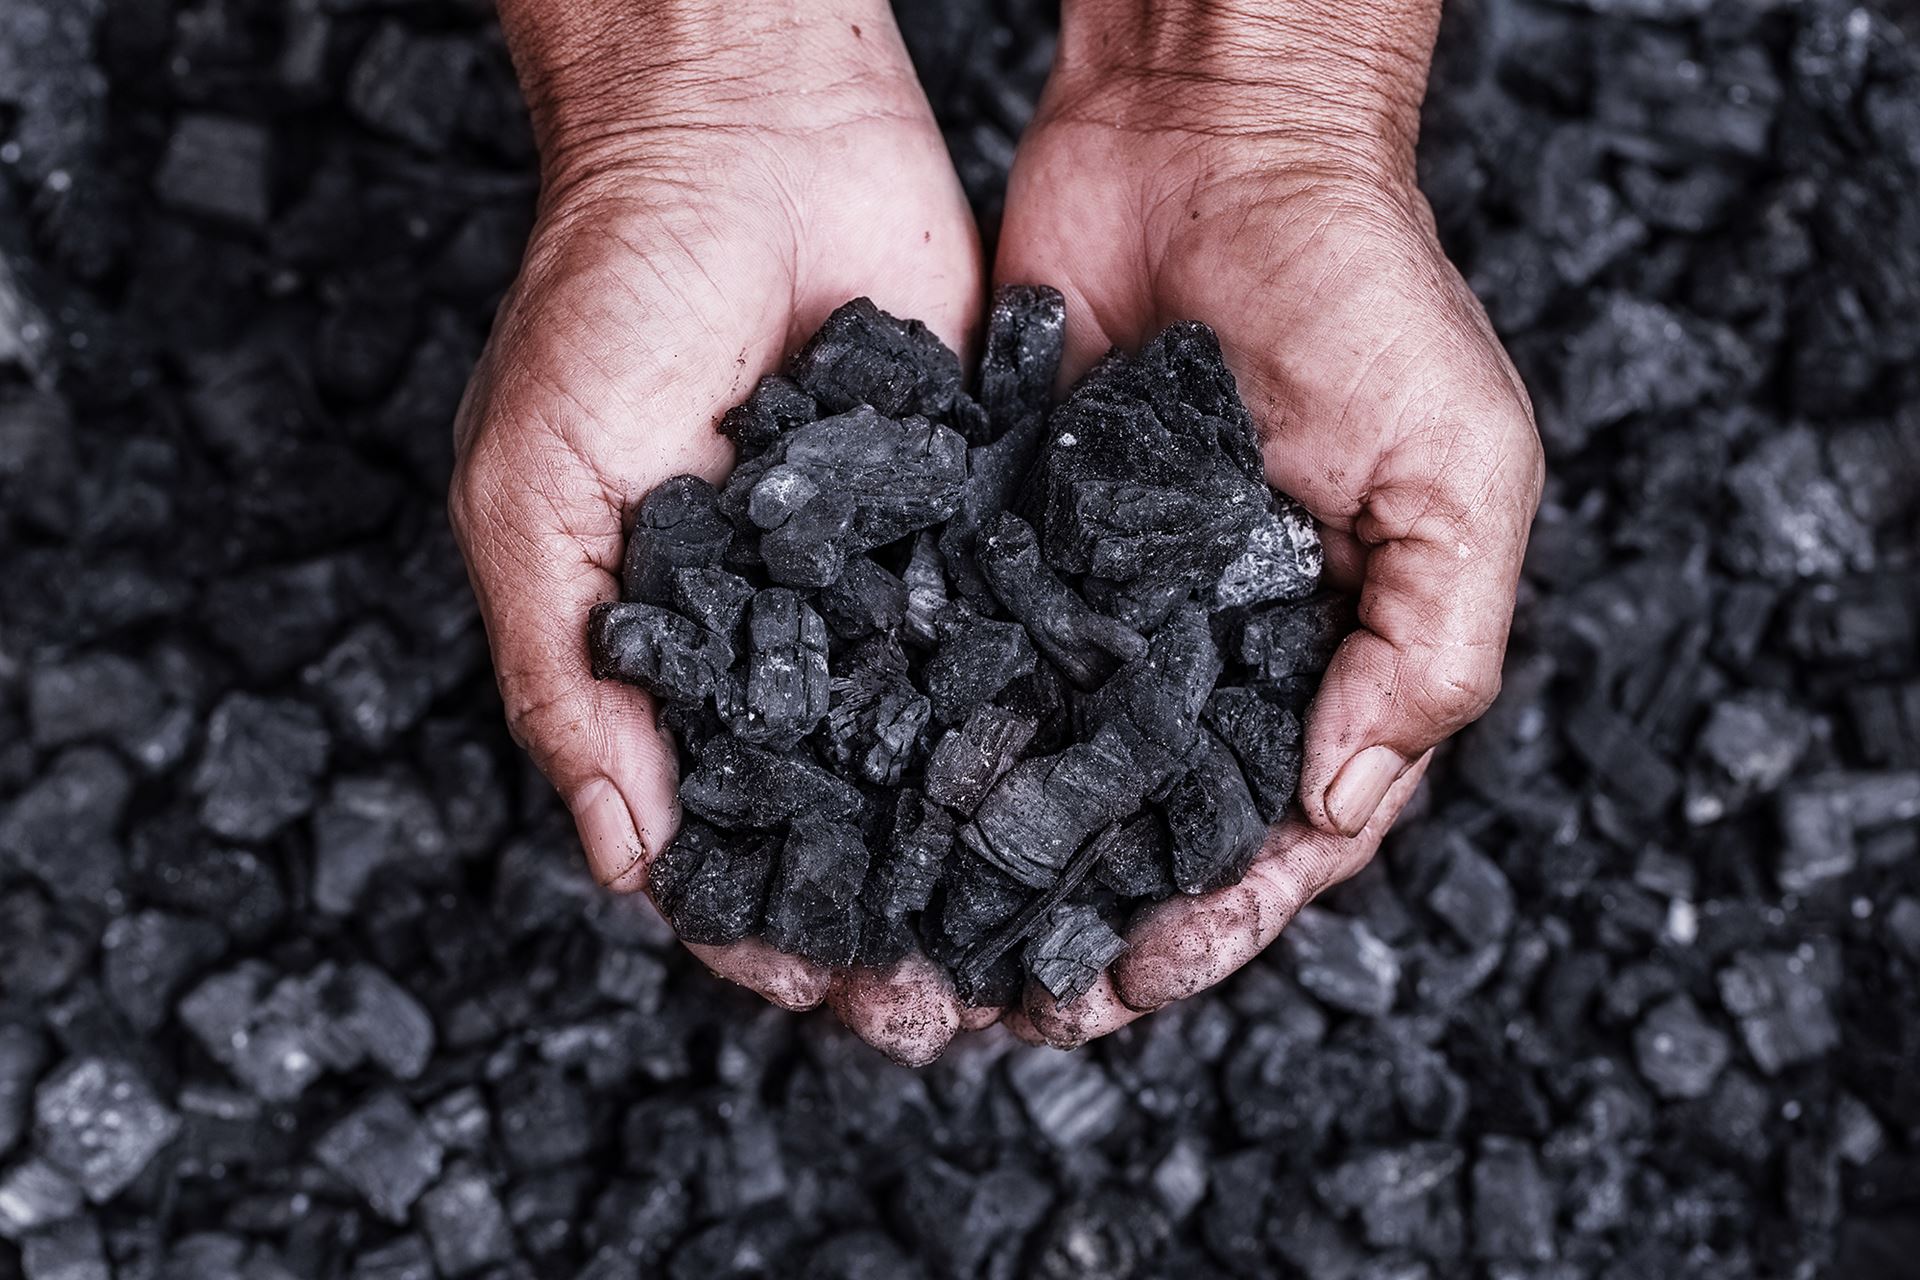 Coking coal production in Russia has decreased 